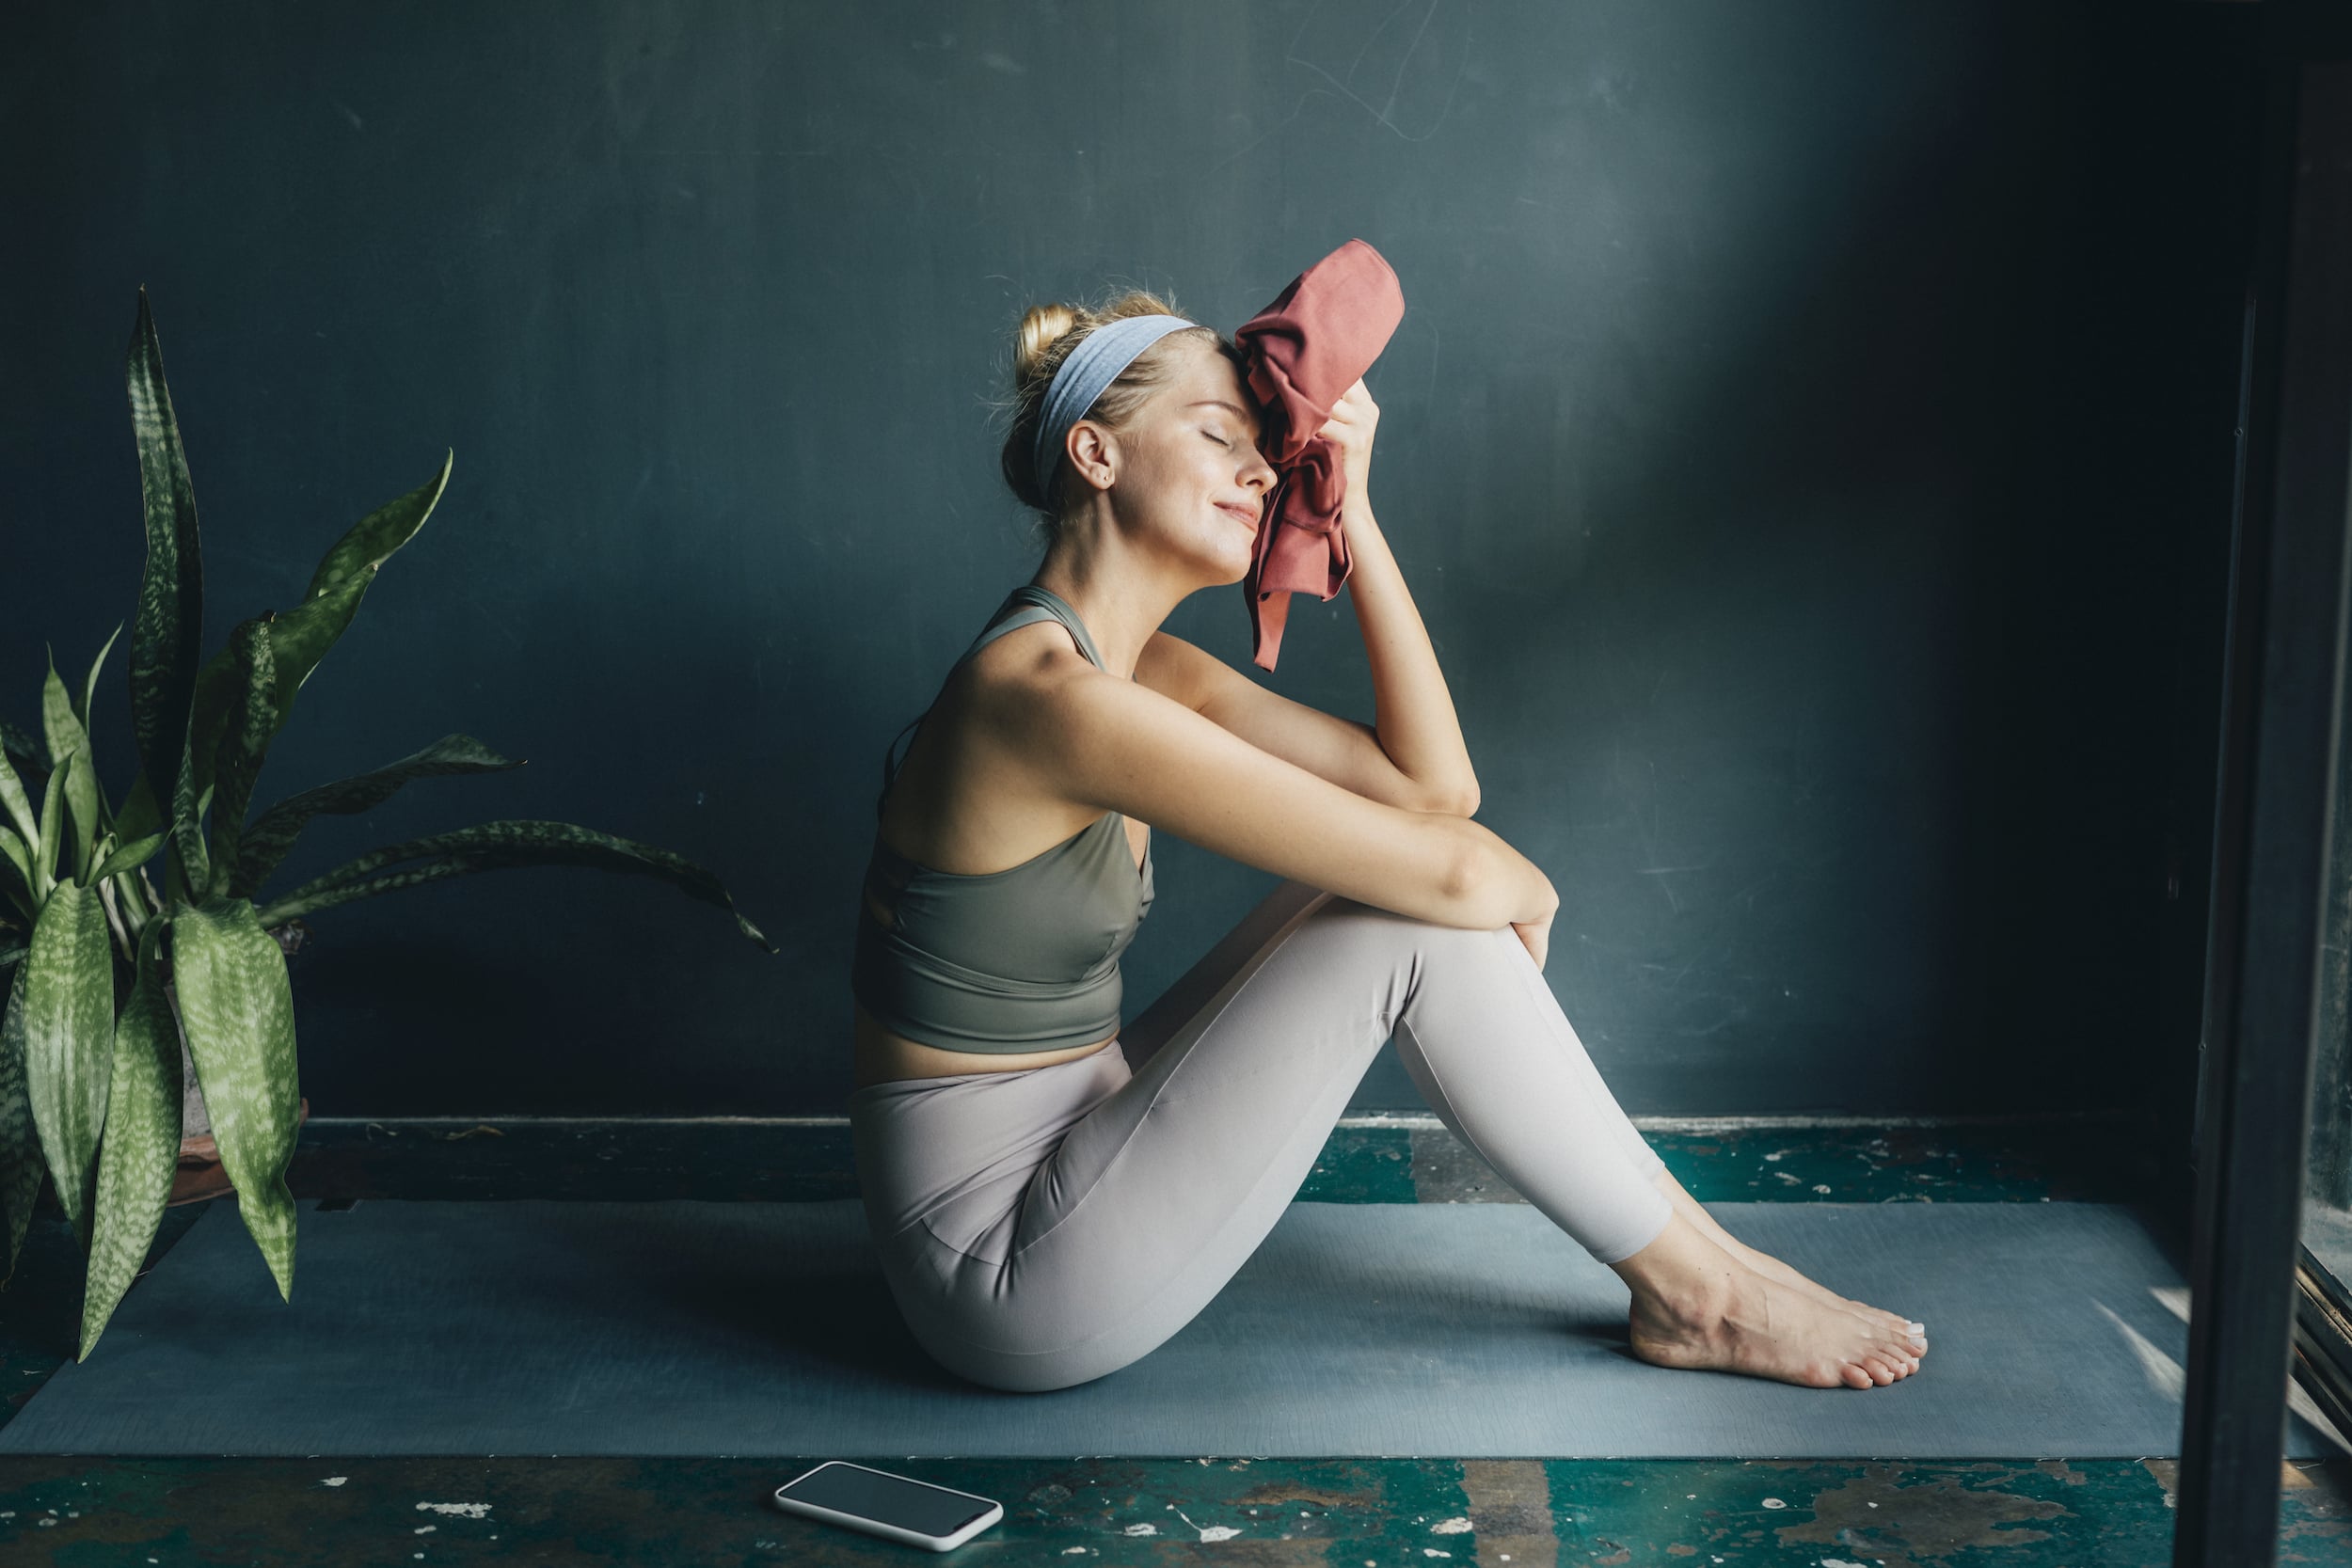 A Workout Everyone Swears By: The Ballet Barre Workout